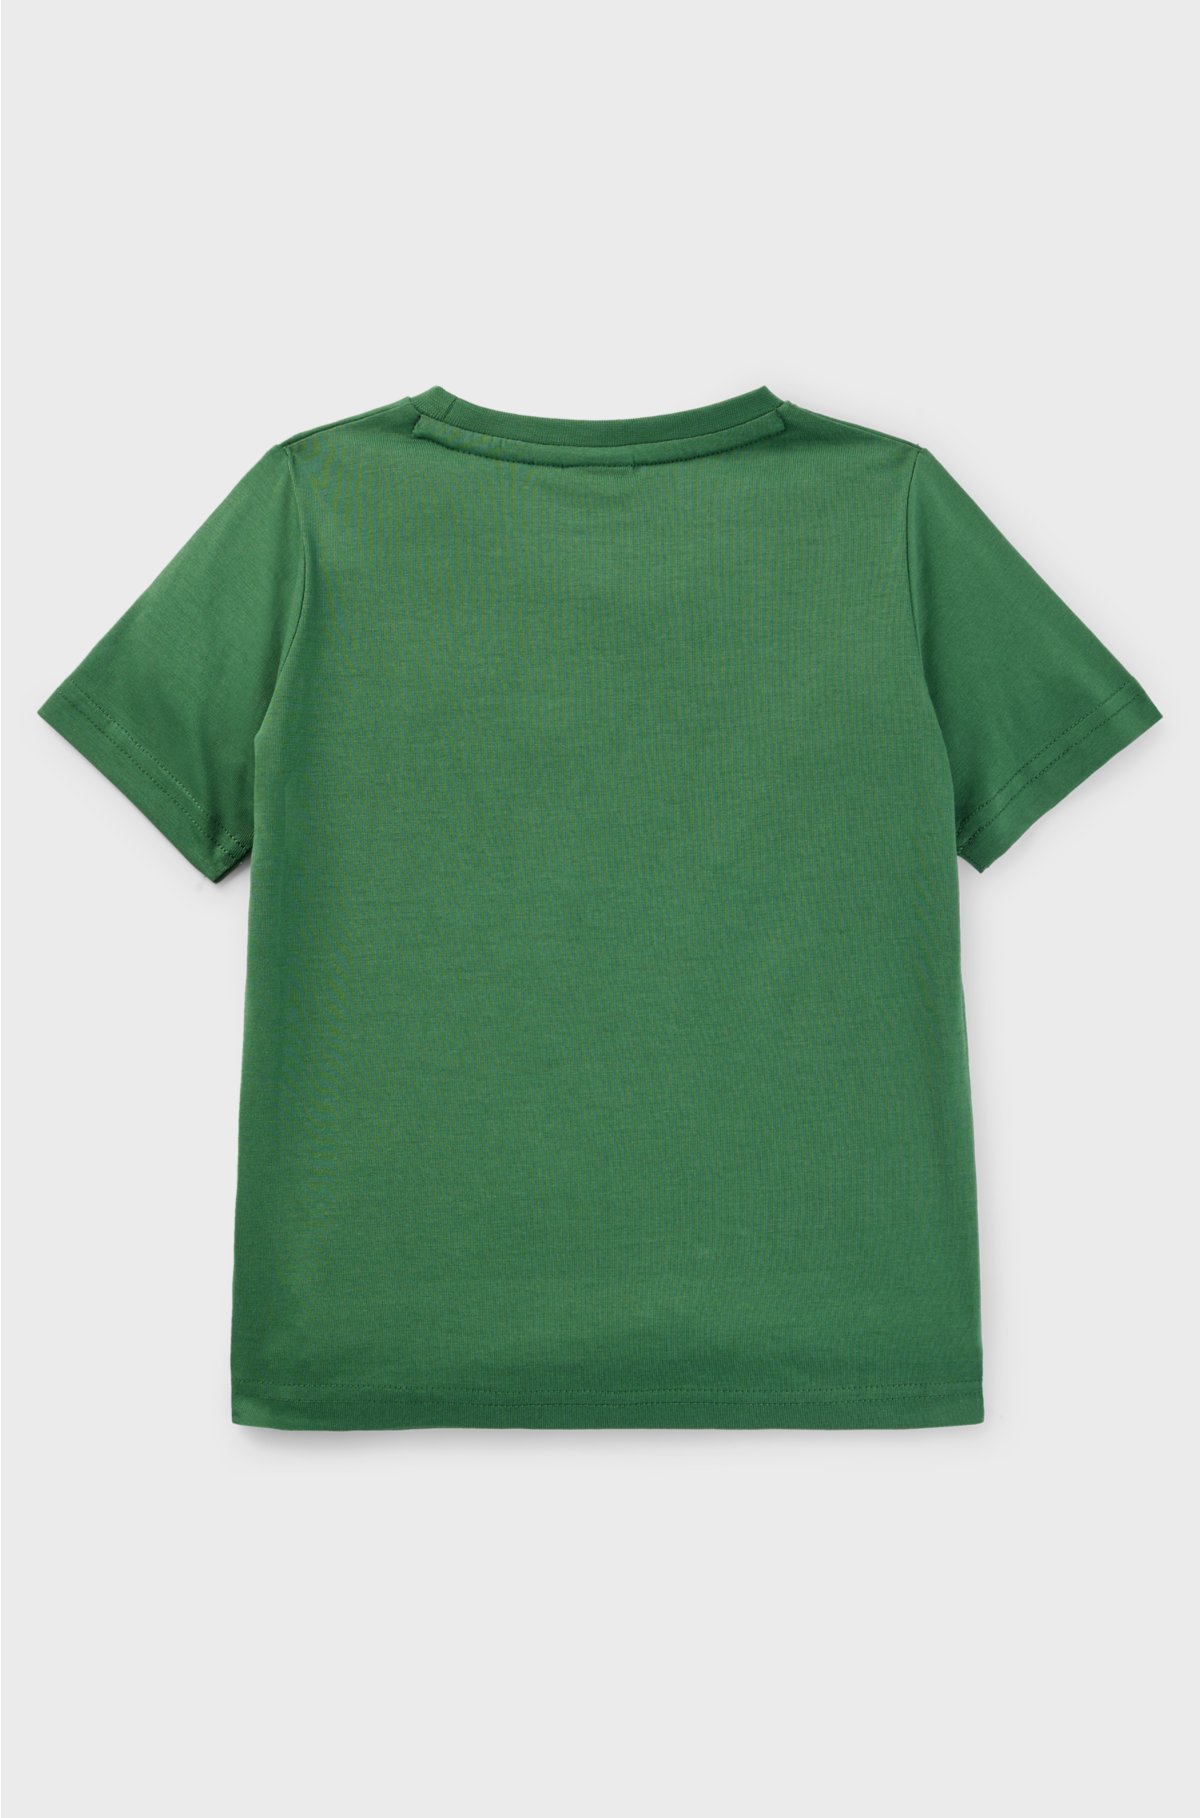 Kids' T-shirt in cotton jersey with repeat logos, Dark Green